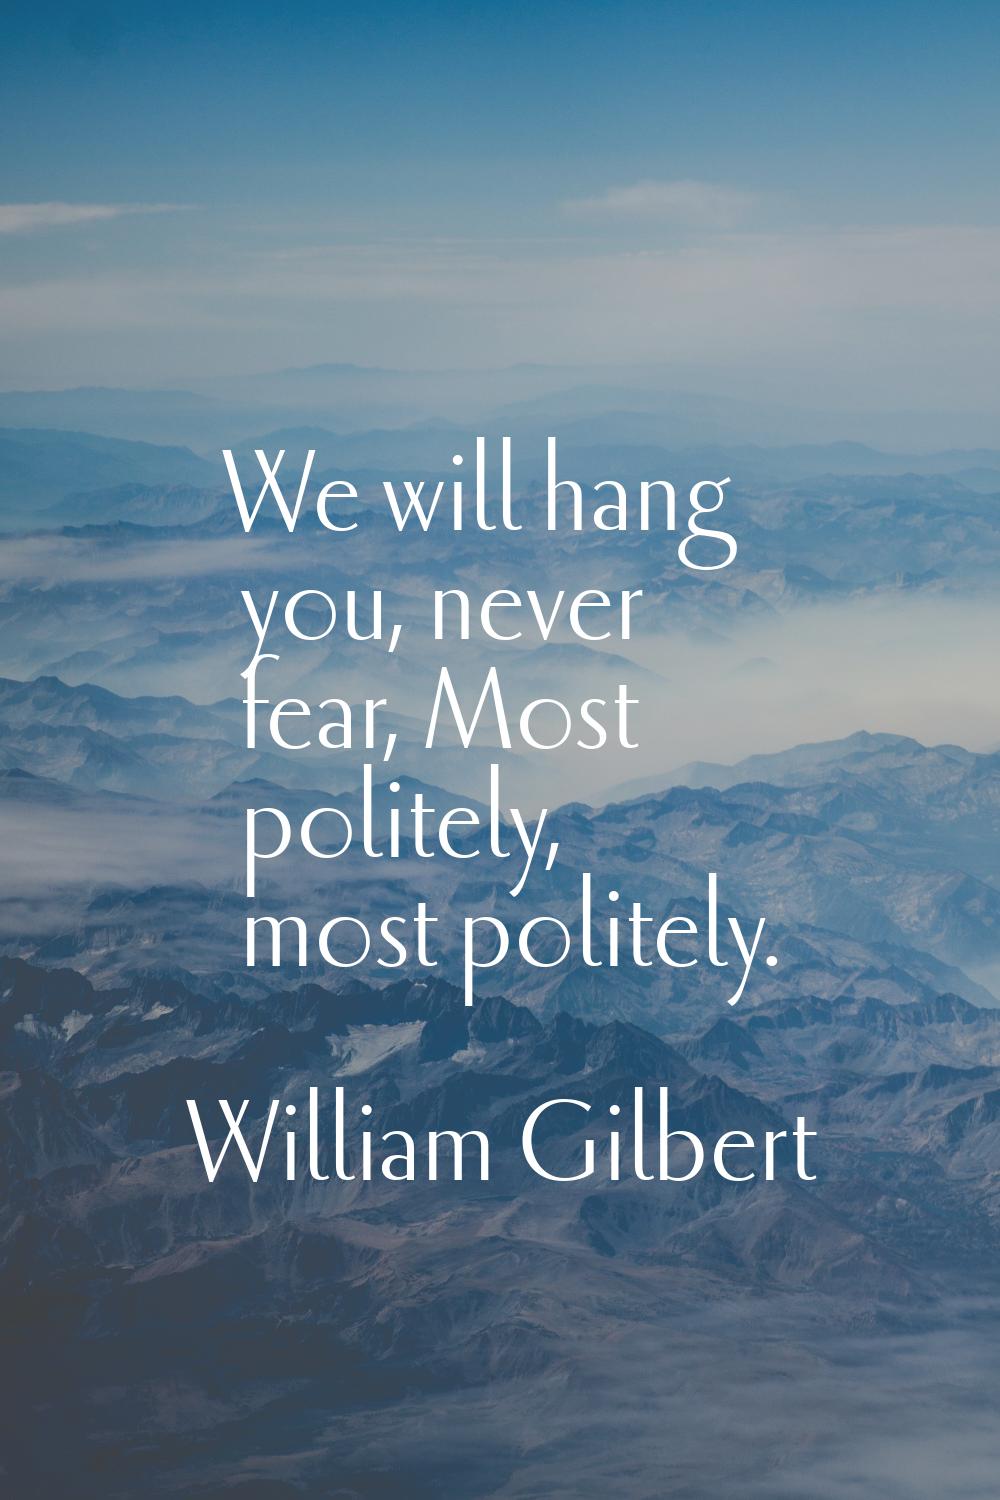 We will hang you, never fear, Most politely, most politely.